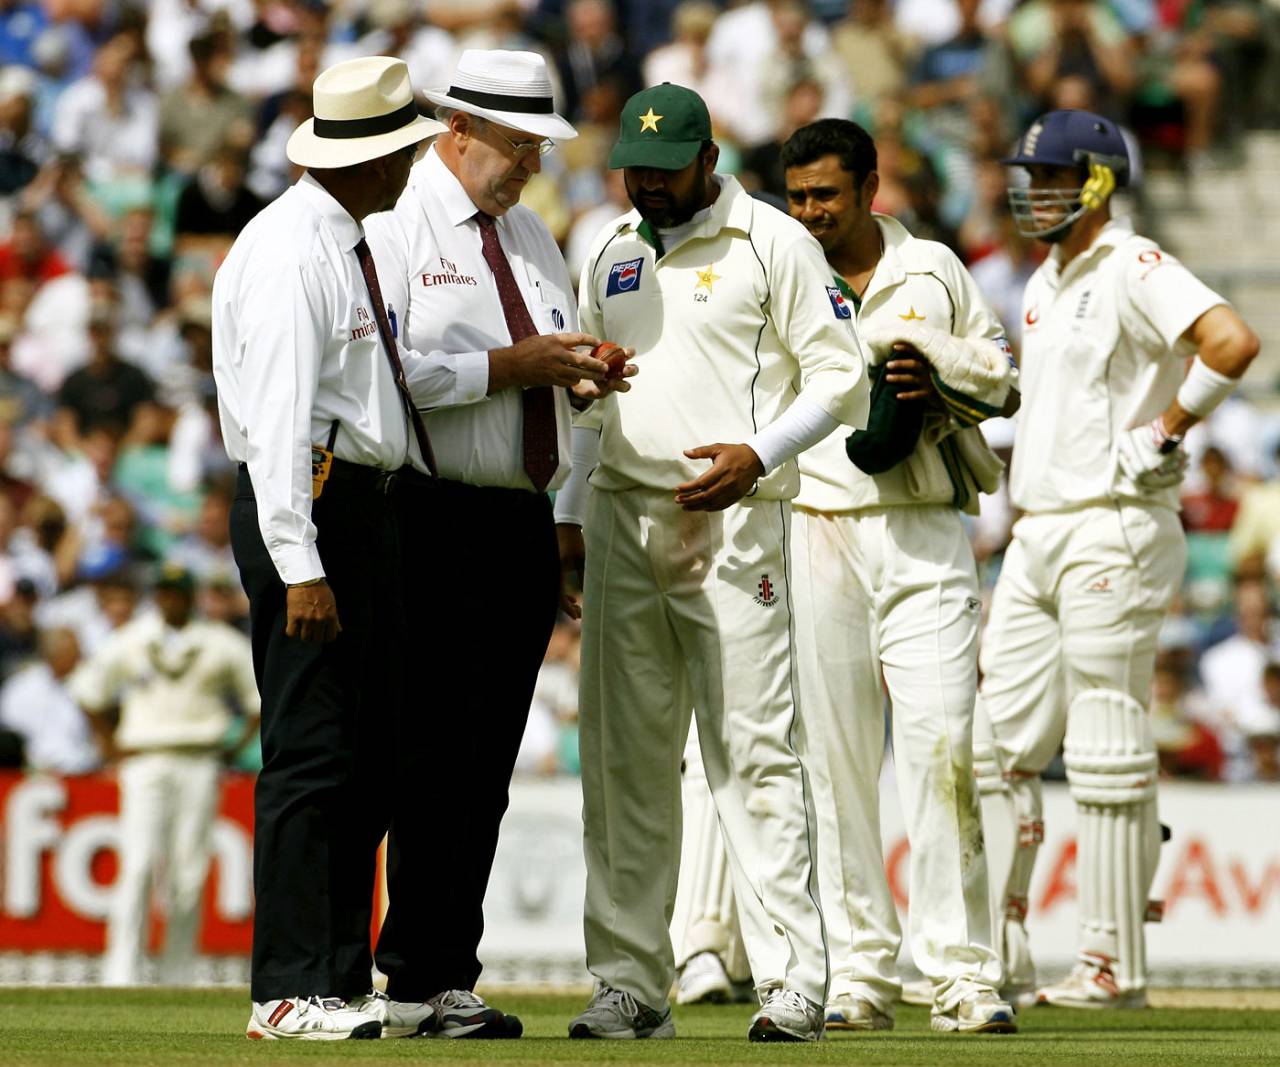 Darrell Hair and Inzamam-ul-Haq examine the ball, England v Pakistan, 4th Test, The Oval, August 20, 2006